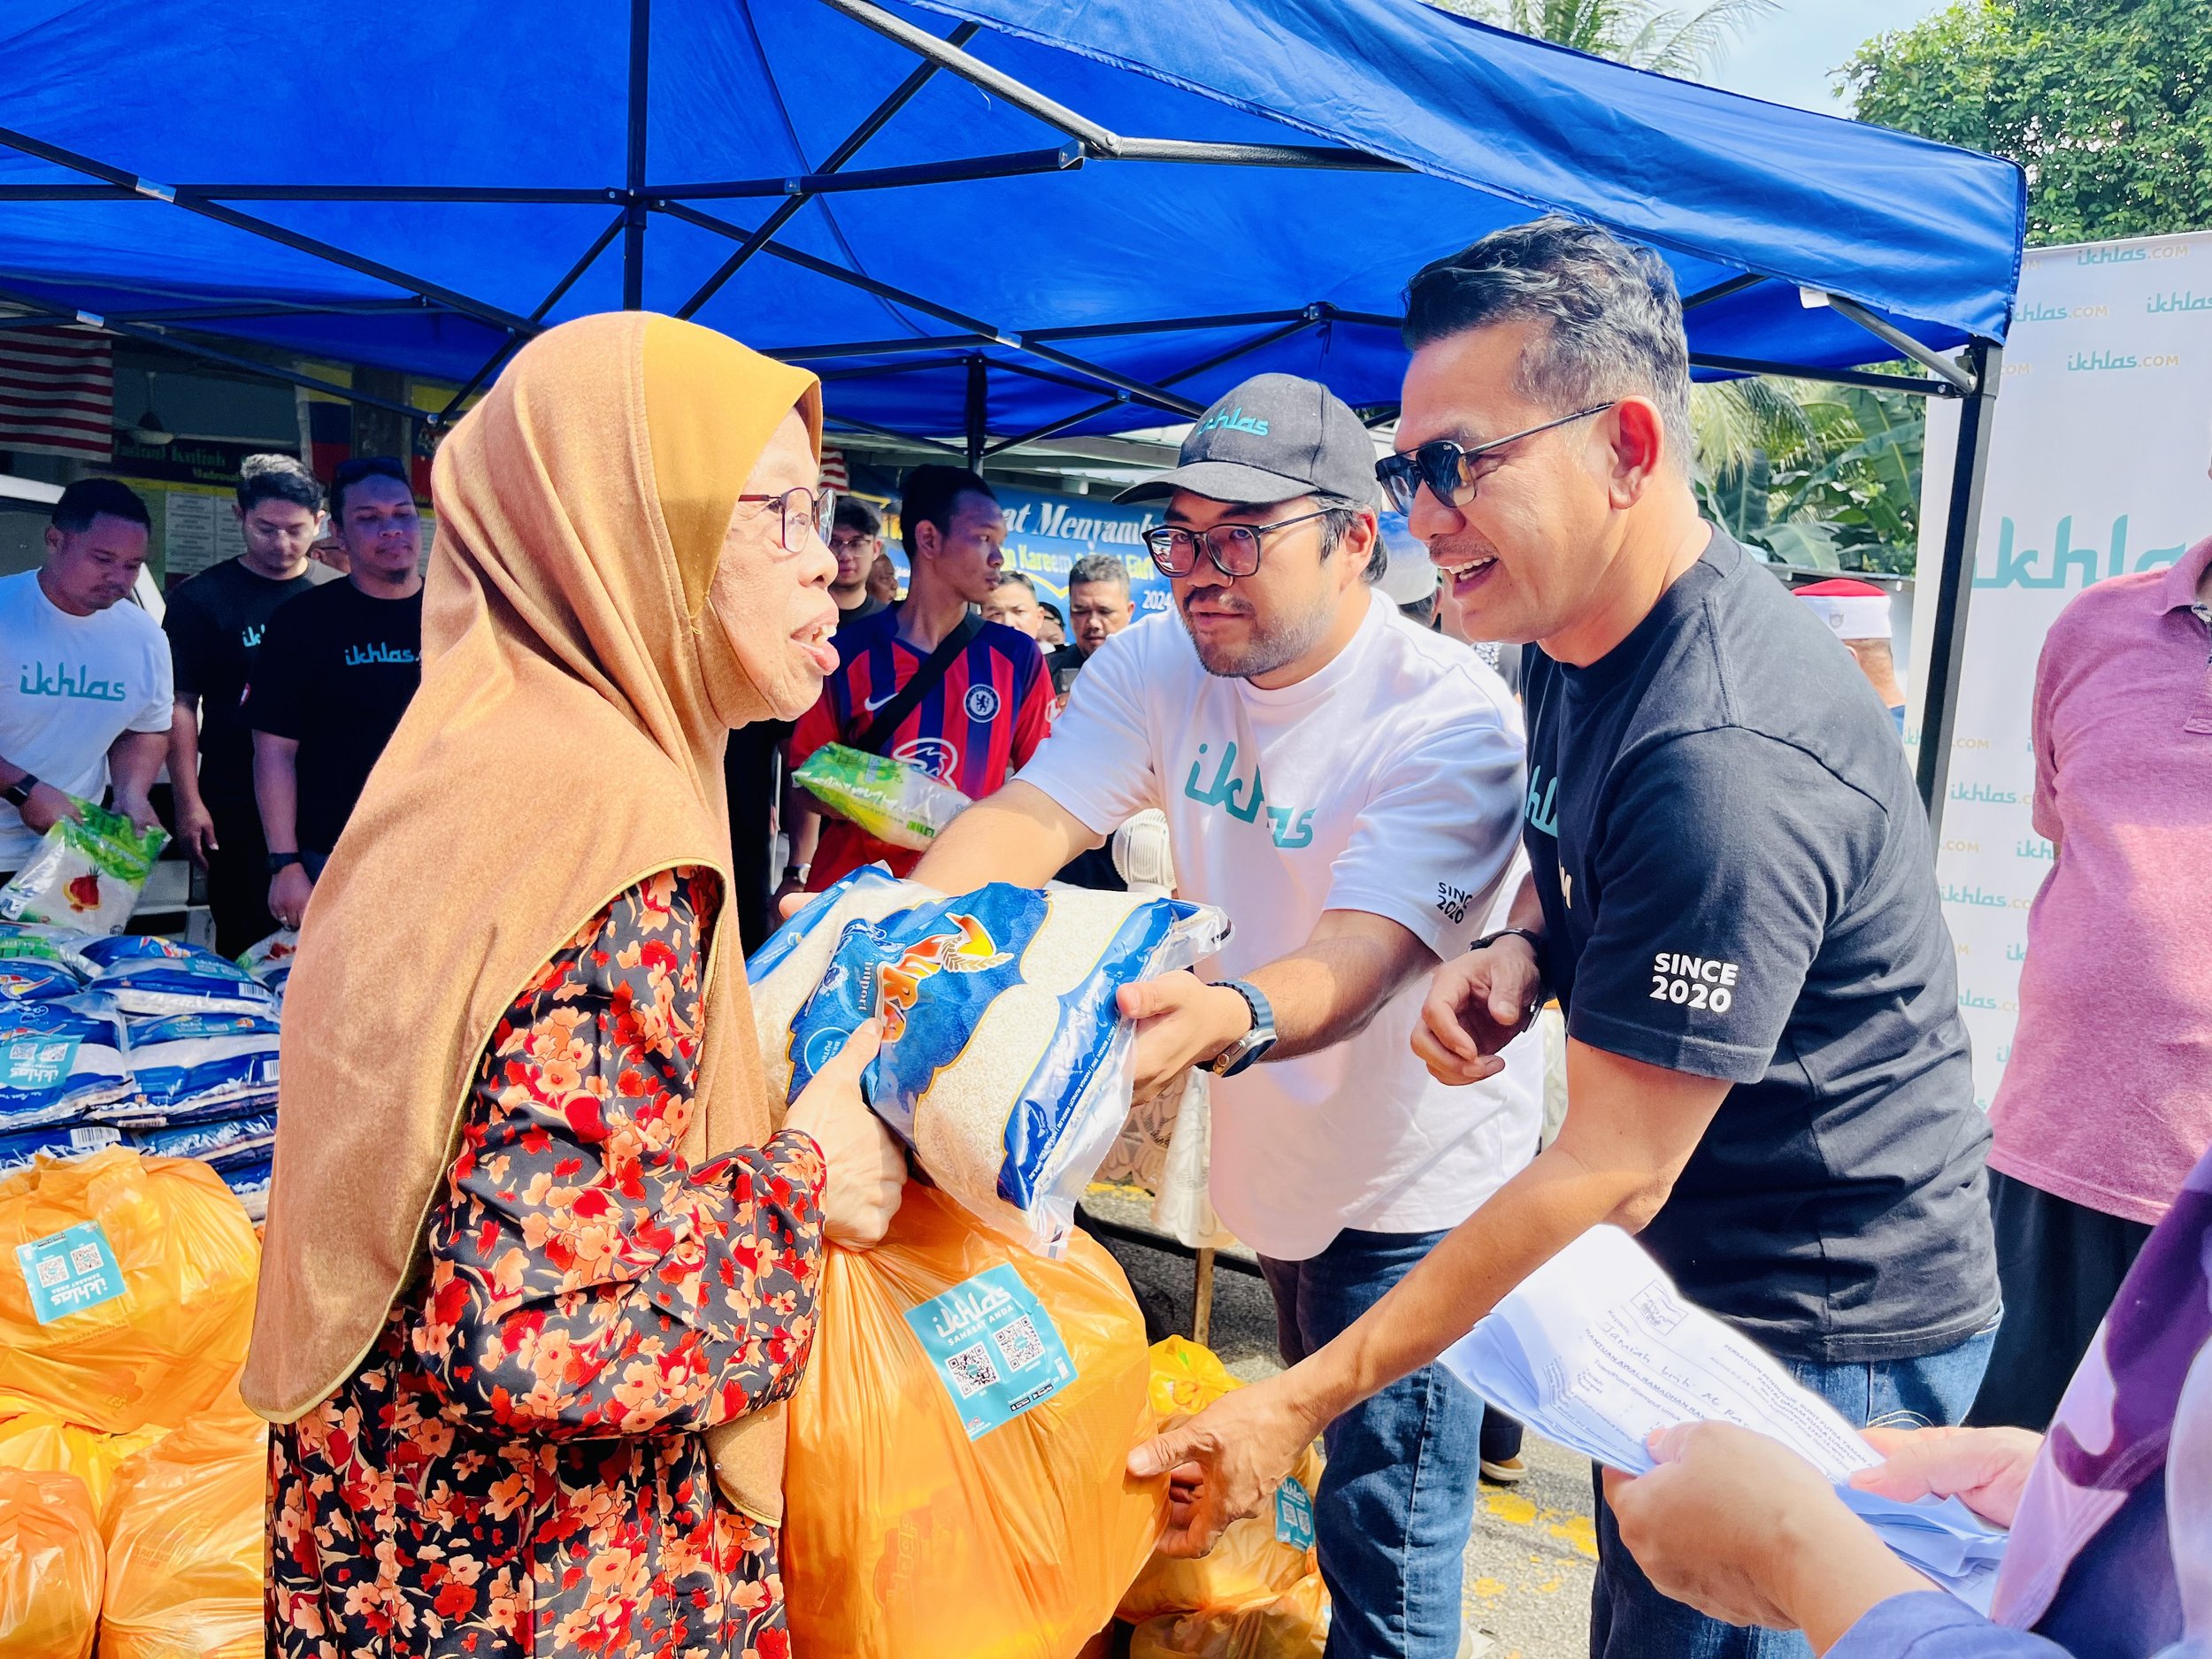  (From the right) Datuk Rosyam Nor and ikhlas.com Chief Executive Officer, Ikhlas Kamarudin handing over food baskets containing basic necessities under the 1000 Months of Sadaqah campaign to recipients at Pantai Dalam, Kuala Lumpur. 